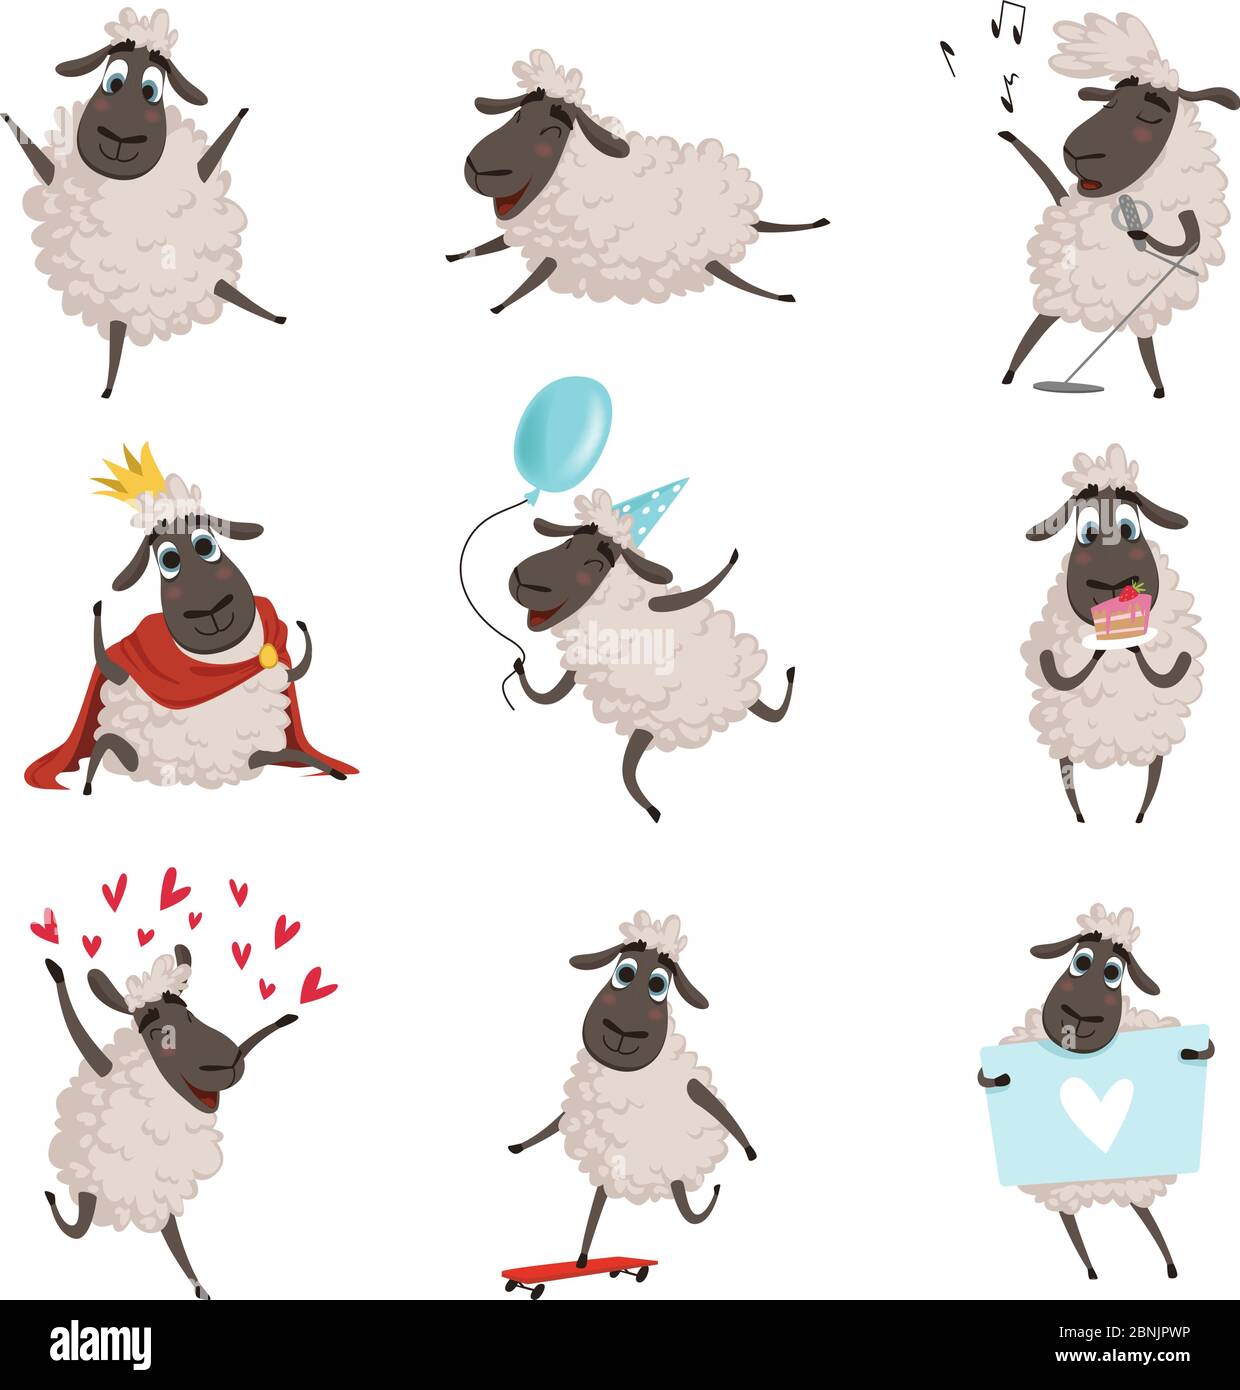 Cartoon farm animals. Sheep playing and making different actions. Vector characters set isolate on white Stock Vector